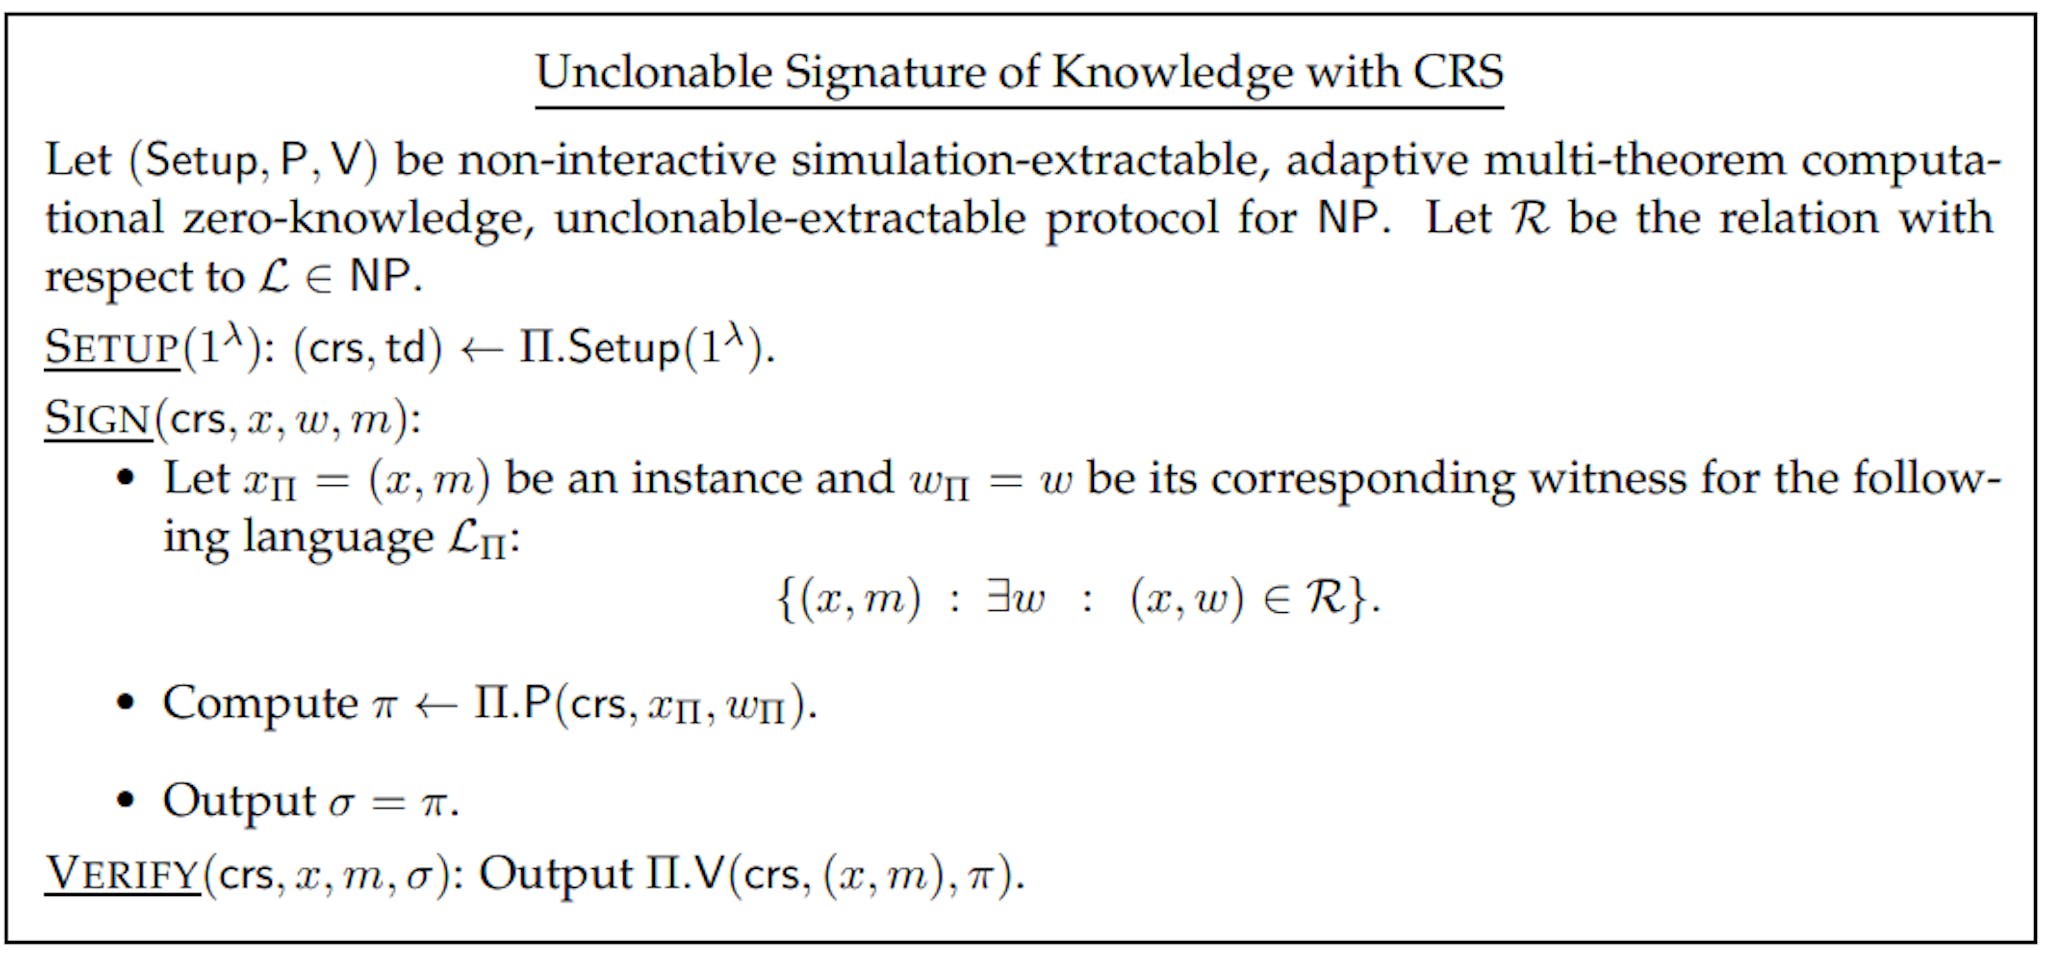 Figure 6: Unclonable Signature of Knowledge in CRS model